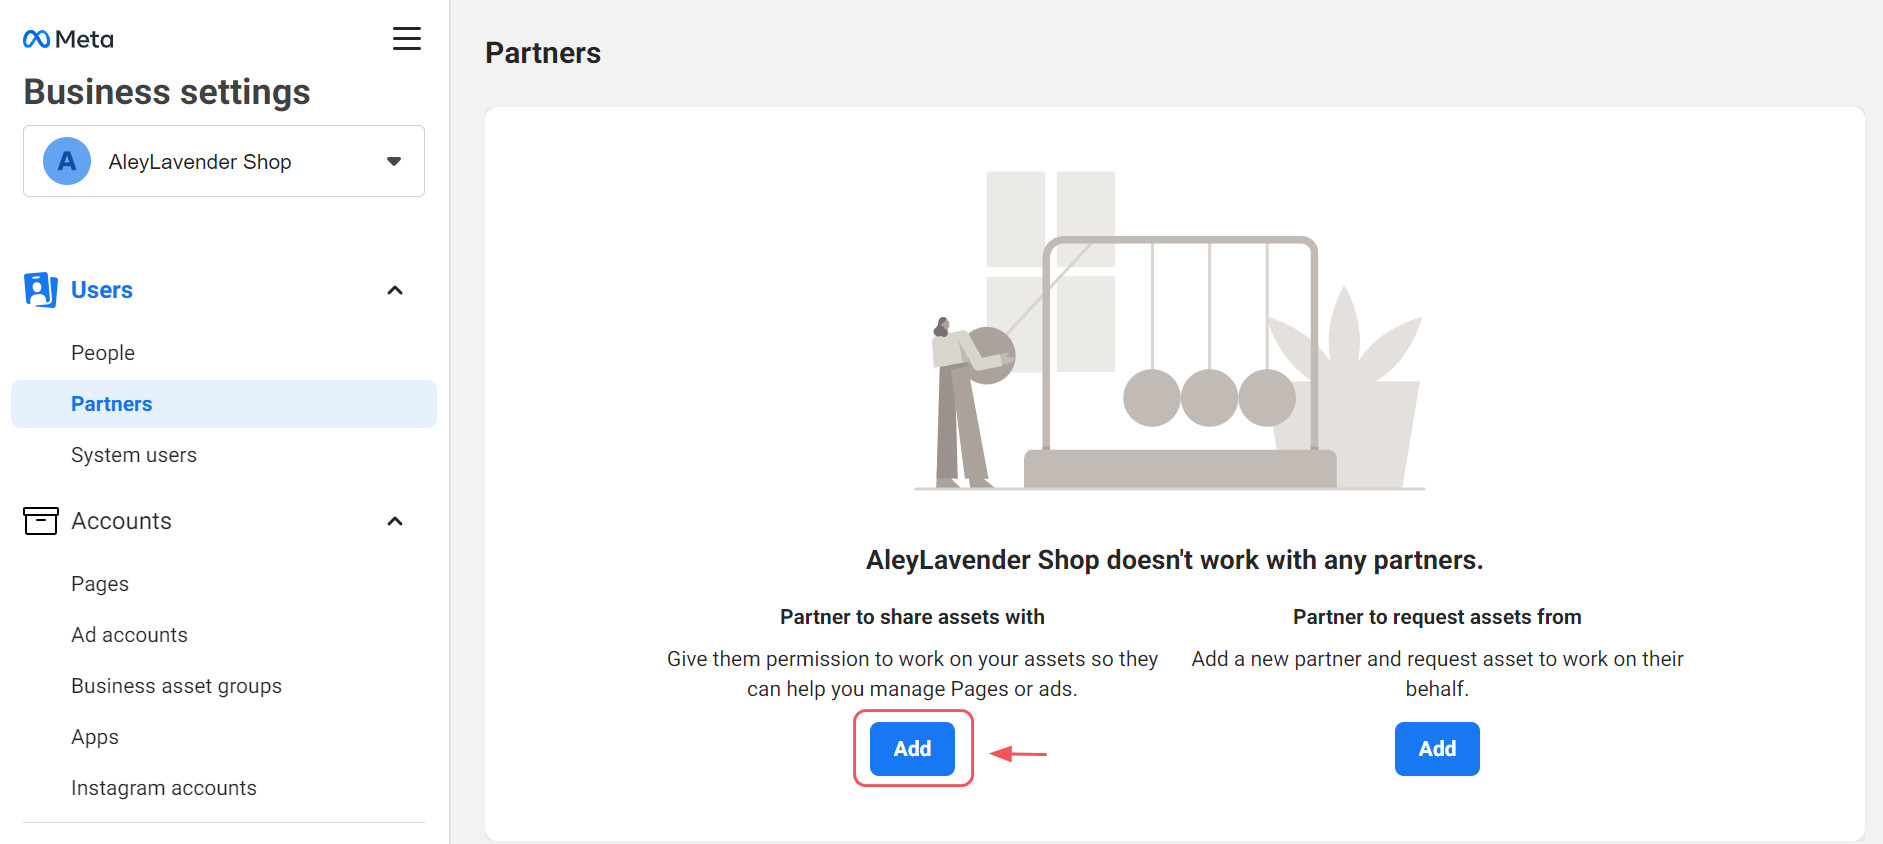 “Partner to share assets with” → Add